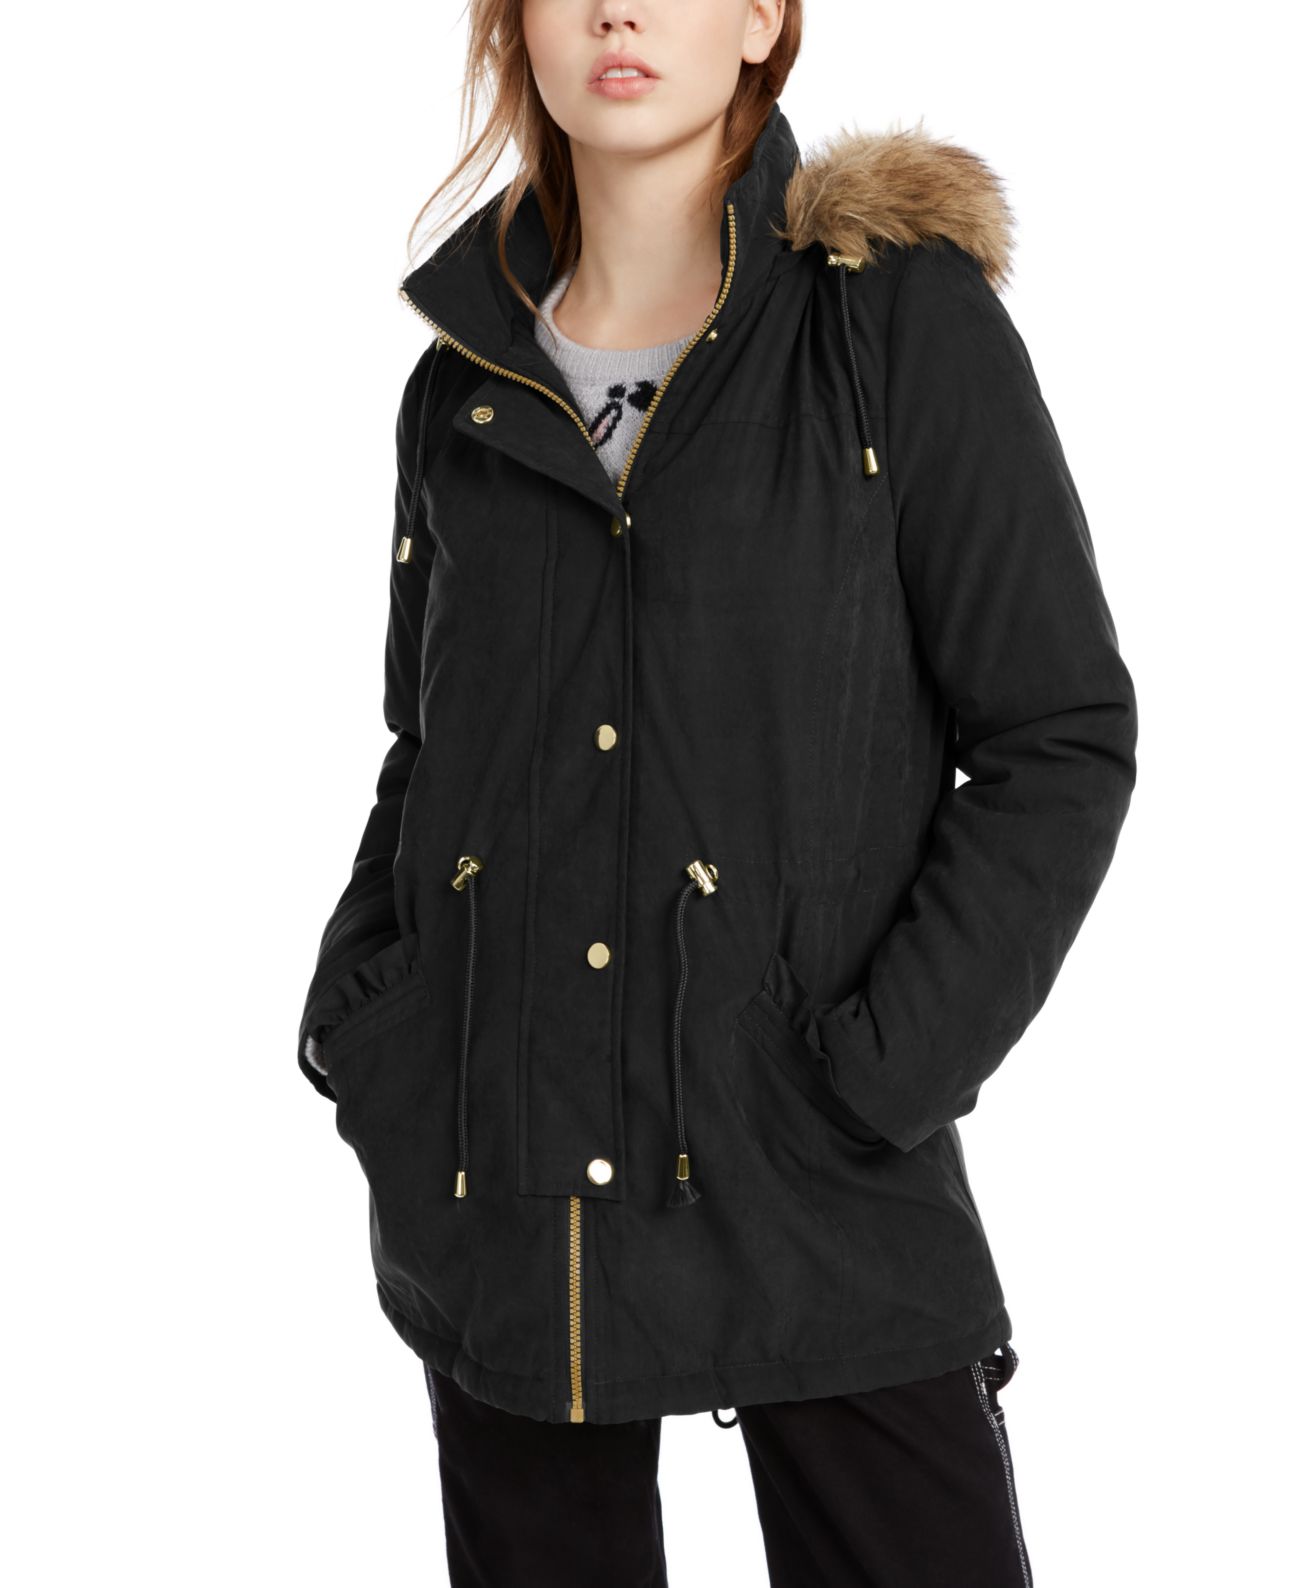 Celebrity Pink Juniors&#8217; Faux-Fur Trim Hooded Parka Coats, Black, Small - image 1 of 4